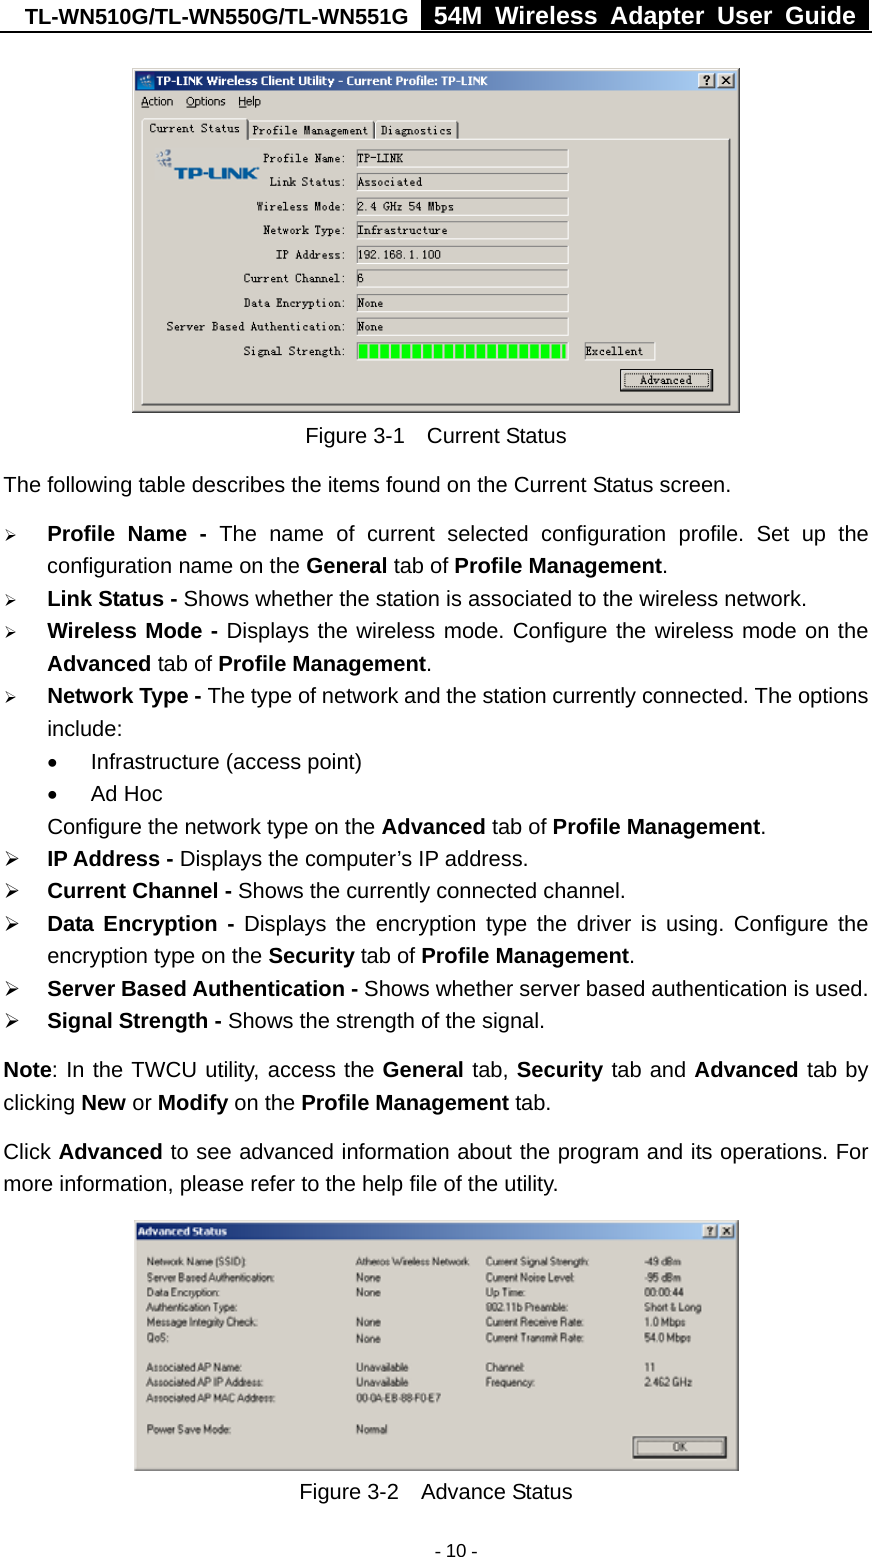 TL-WN510G/TL-WN550G/TL-WN551G  54M Wireless Adapter User Guide   - 10 - Figure 3-1  Current Status The following table describes the items found on the Current Status screen. ¾ Profile Name - The name of current selected configuration profile. Set up the configuration name on the General tab of Profile Management.  ¾ Link Status - Shows whether the station is associated to the wireless network. ¾ Wireless Mode - Displays the wireless mode. Configure the wireless mode on the Advanced tab of Profile Management. ¾ Network Type - The type of network and the station currently connected. The options include: •  Infrastructure (access point) • Ad Hoc Configure the network type on the Advanced tab of Profile Management. ¾ IP Address - Displays the computer’s IP address. ¾ Current Channel - Shows the currently connected channel. ¾ Data Encryption - Displays the encryption type the driver is using. Configure the encryption type on the Security tab of Profile Management. ¾ Server Based Authentication - Shows whether server based authentication is used. ¾ Signal Strength - Shows the strength of the signal. Note: In the TWCU utility, access the General tab, Security tab and Advanced tab by clicking New or Modify on the Profile Management tab. Click Advanced to see advanced information about the program and its operations. For more information, please refer to the help file of the utility.  Figure 3-2  Advance Status 